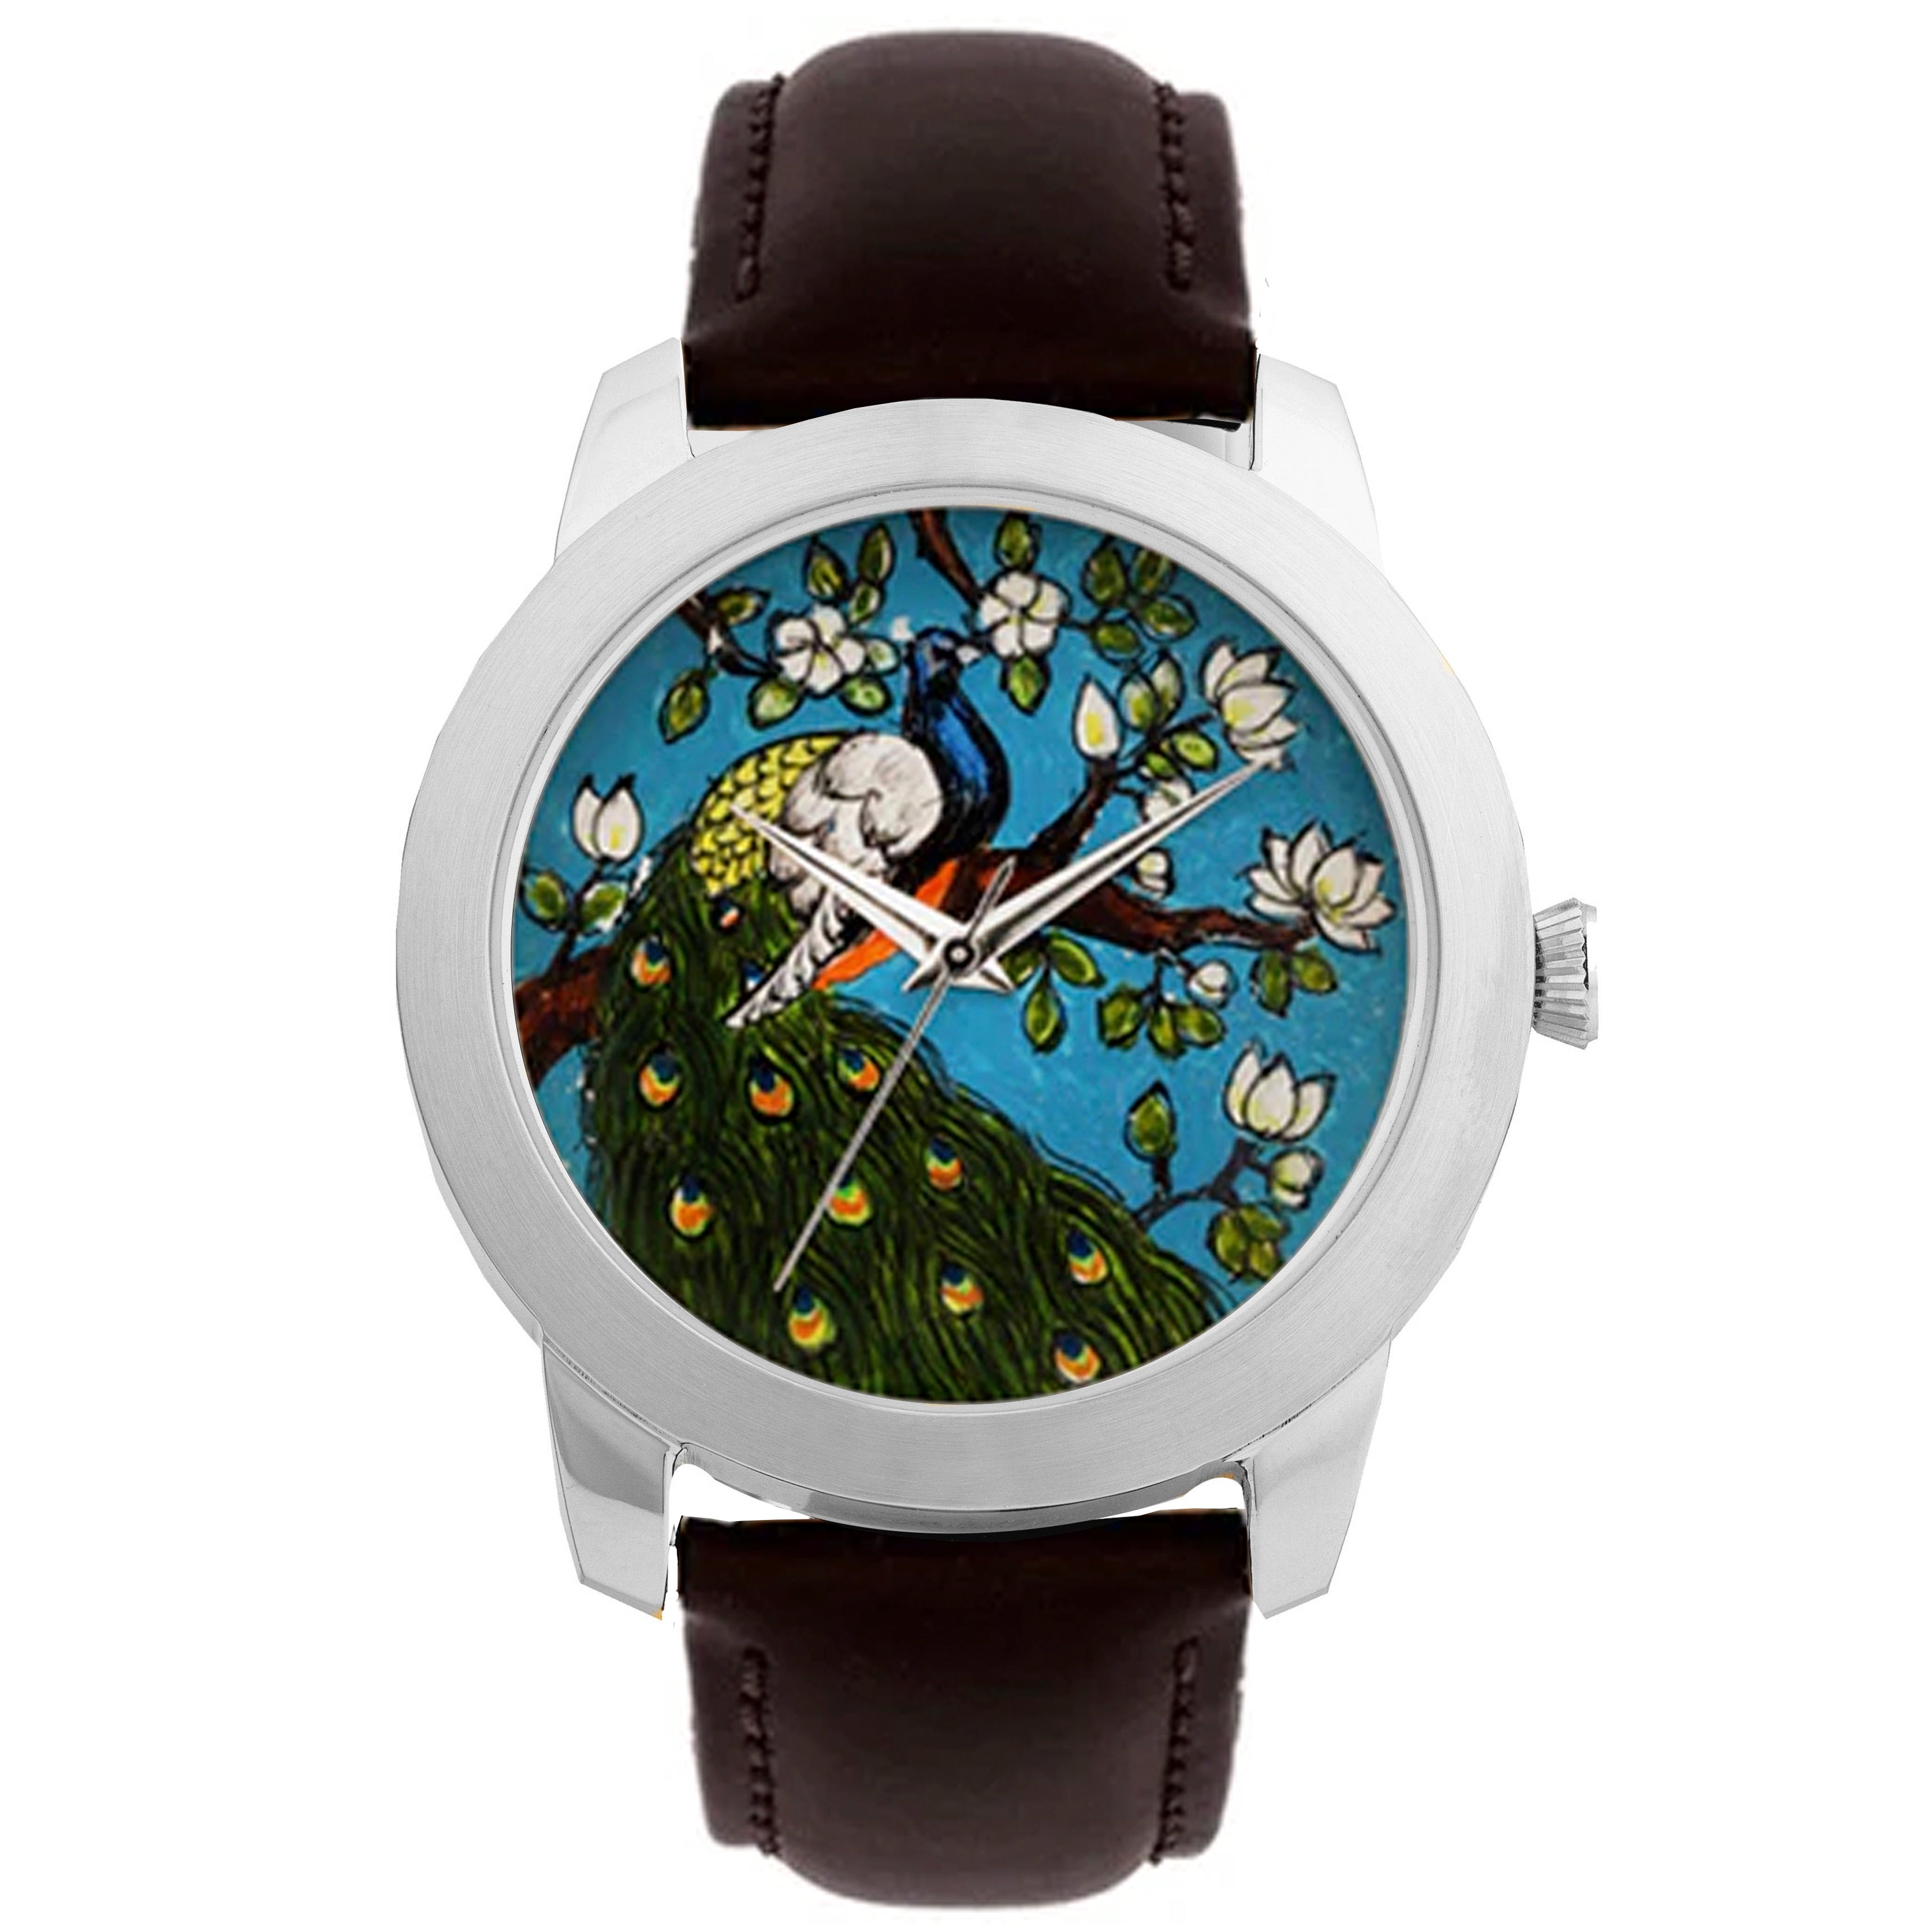 Peacock Painting Watch - Pichwai Watch (40mm)